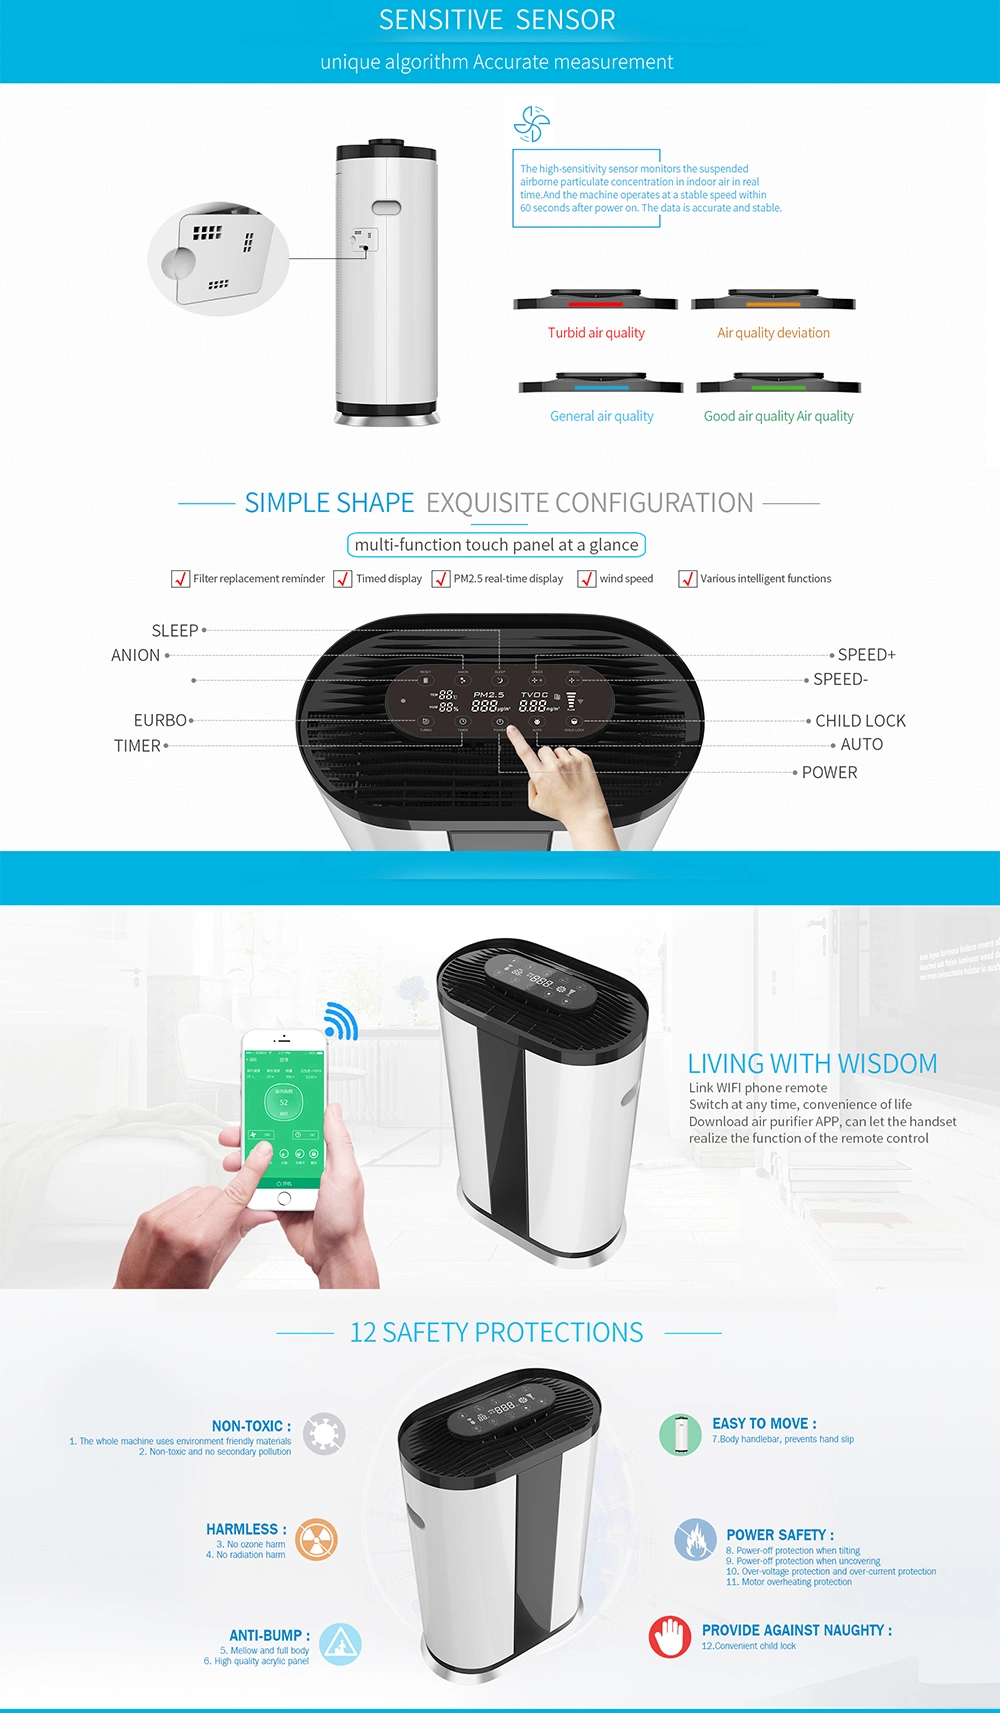 Large Room HEPA H13 Fliter Air Purifier Portable Air Cleaner with Smart WiFi Control